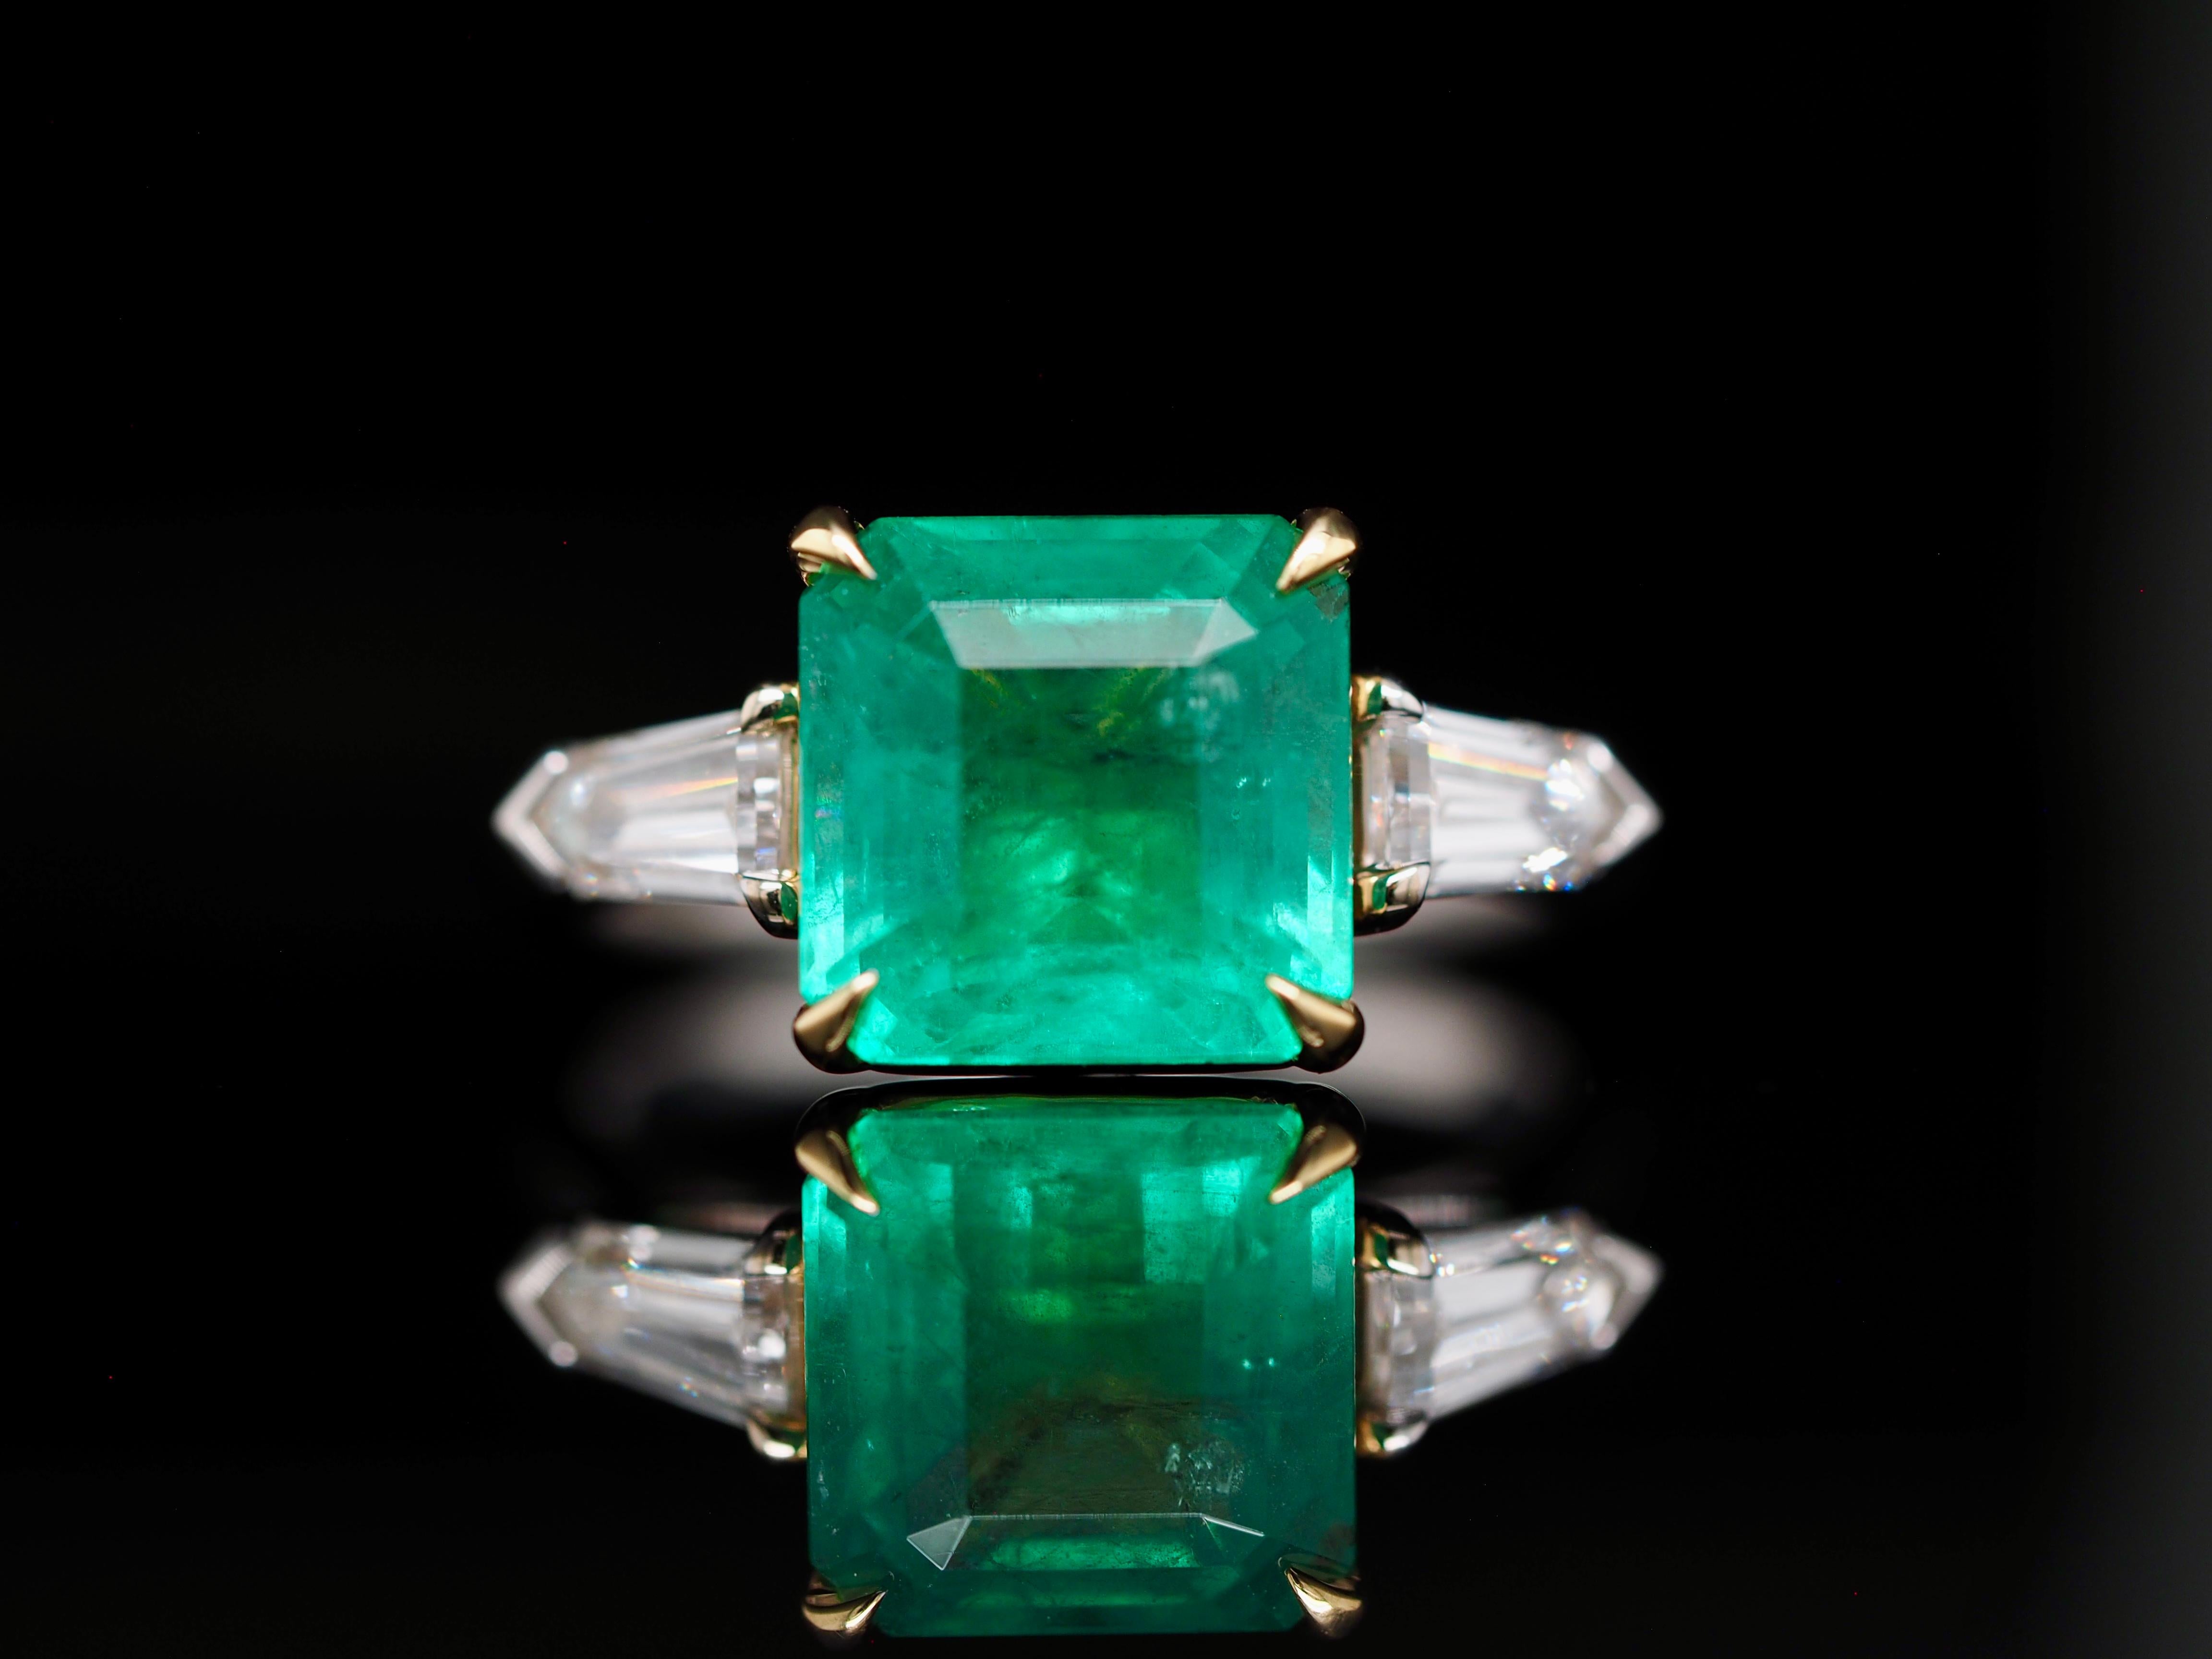 This mythical ring is straight out of a fantasy book. It has incredible natural deep green Zambia emerald. It's set in 18 karat white gold, with a gold detailed prong holding the emerald. Includes amazing bullet, cut diamond's on both sides of the